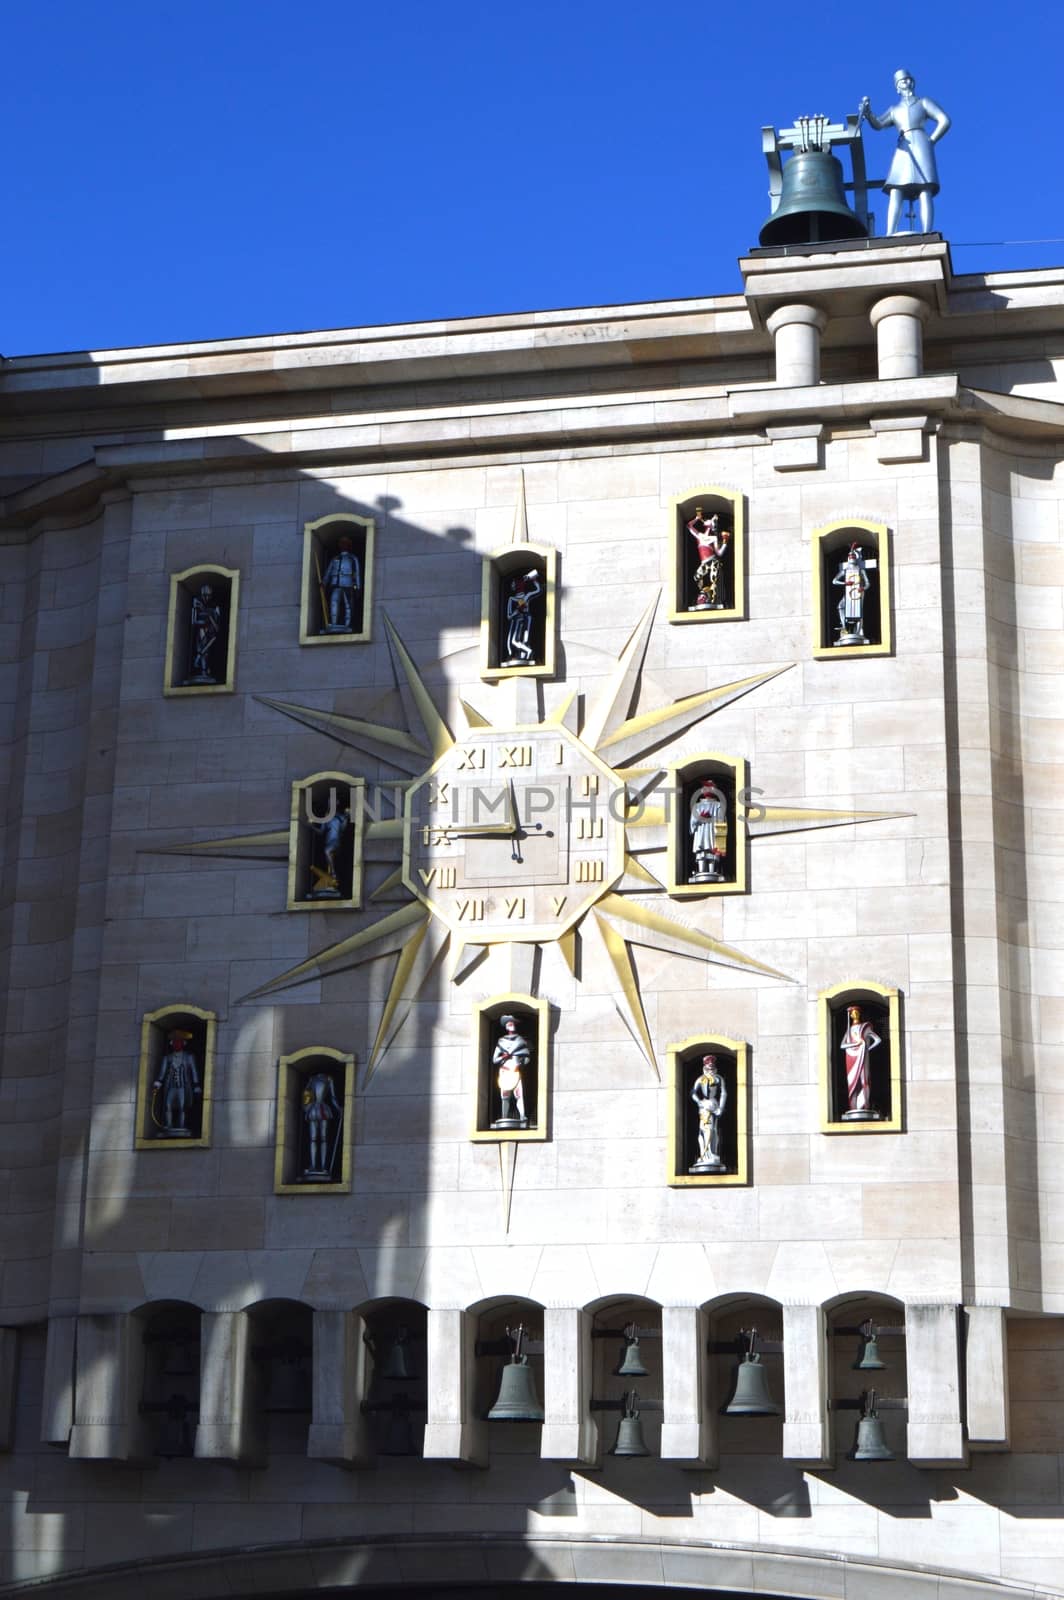 Clock face on a sun-shaped facade with figurines and a bell ringer